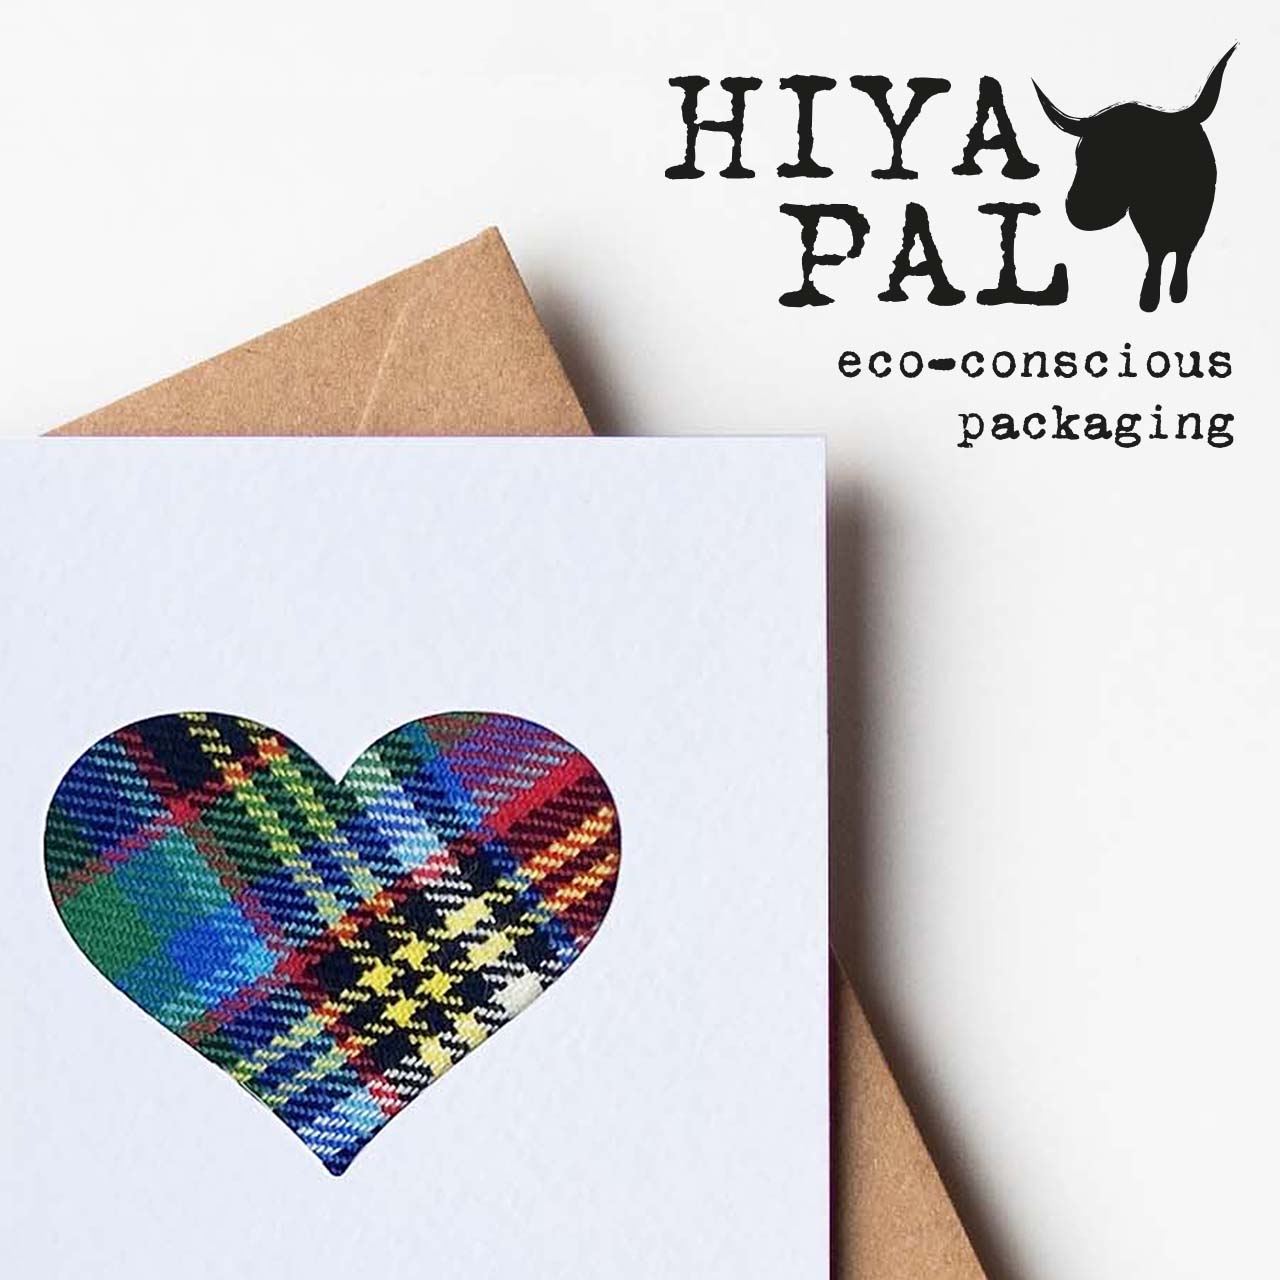 'Missing yer face' Scottish Card with Tartan